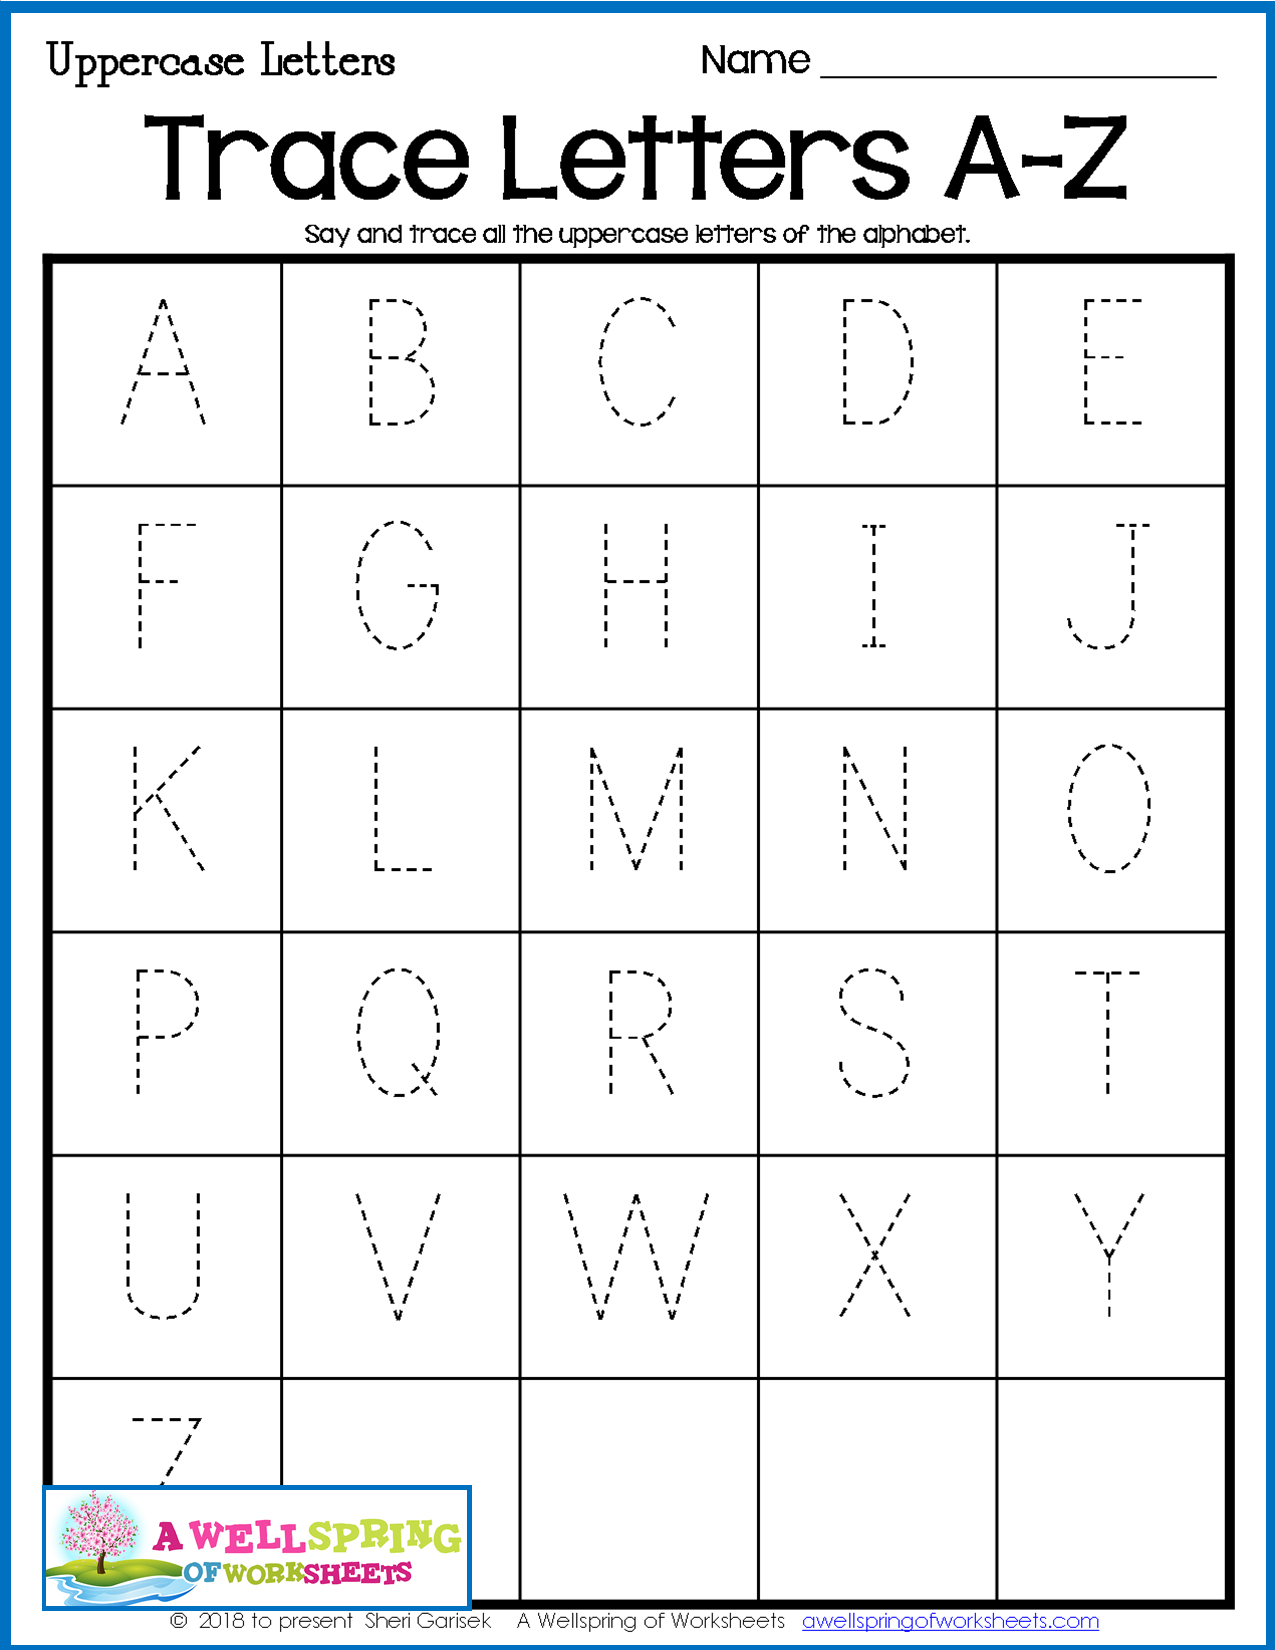 Coloring Book : Alphabetg Worksheets Coloring Book pertaining to Letter Tracing Worksheets Pdf Free